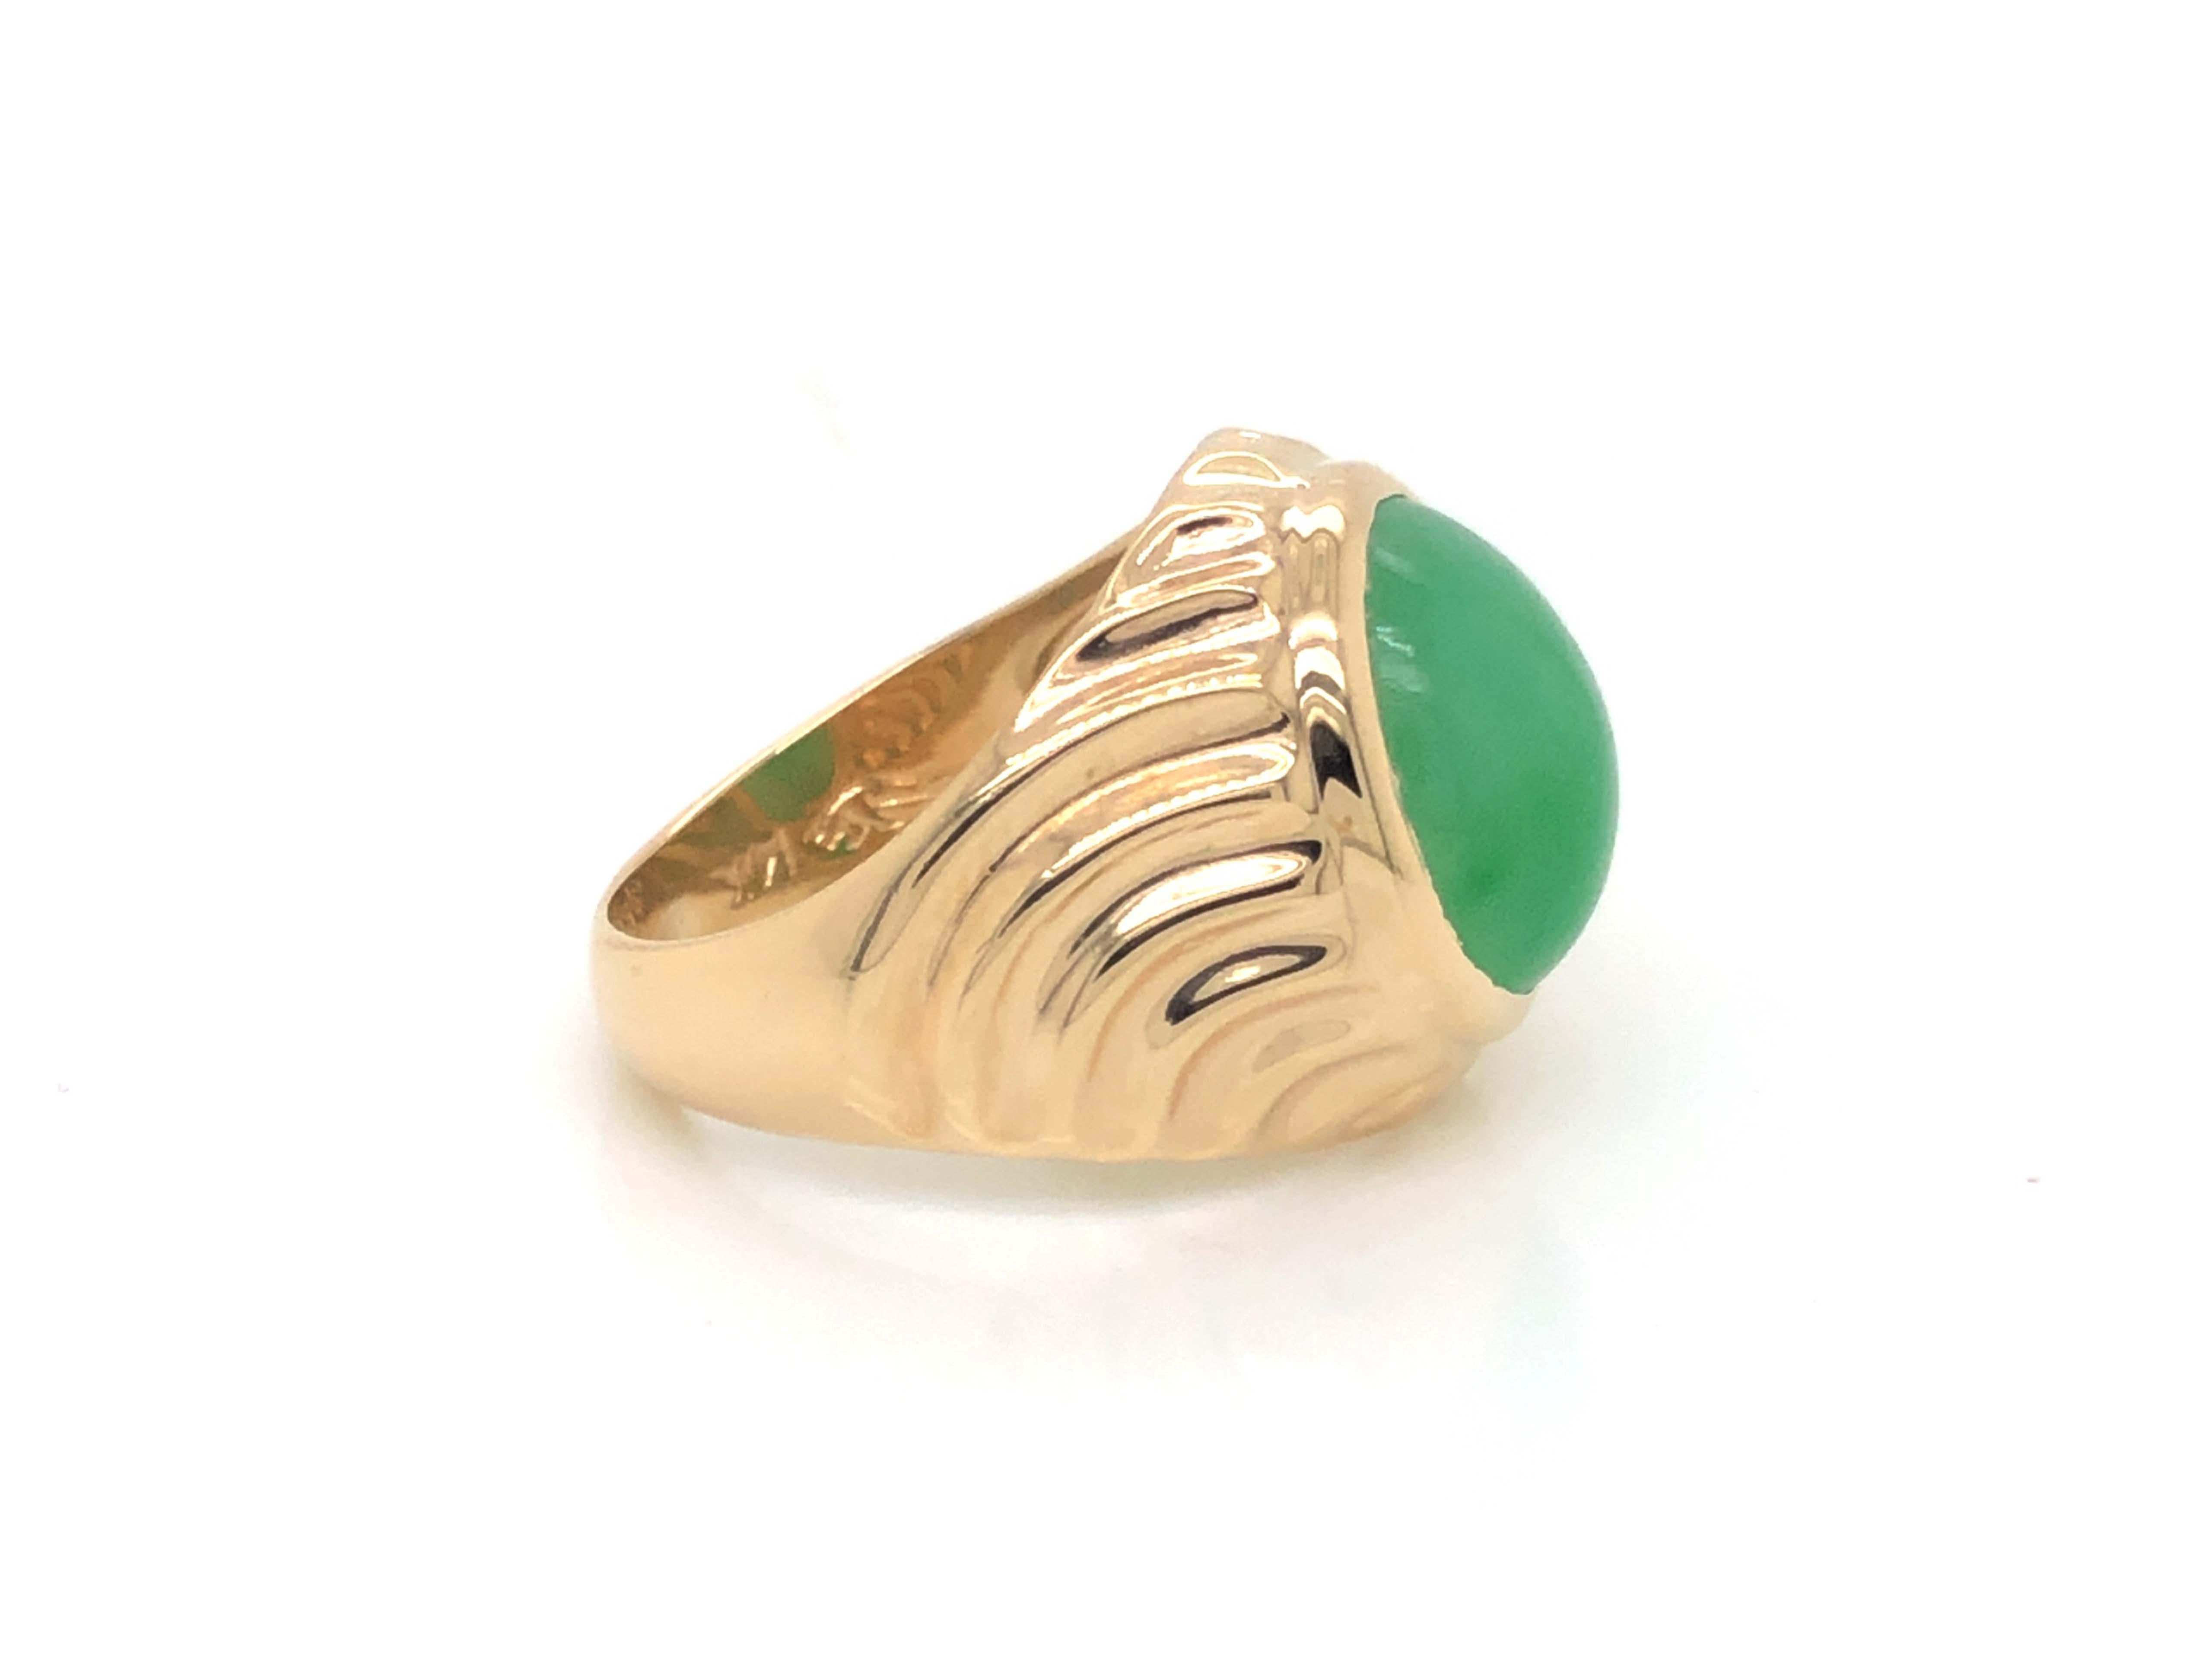 Modern Vintage Men's Oval Cabochon Green Jade Ring with Wave Design 14k Yellow Gold